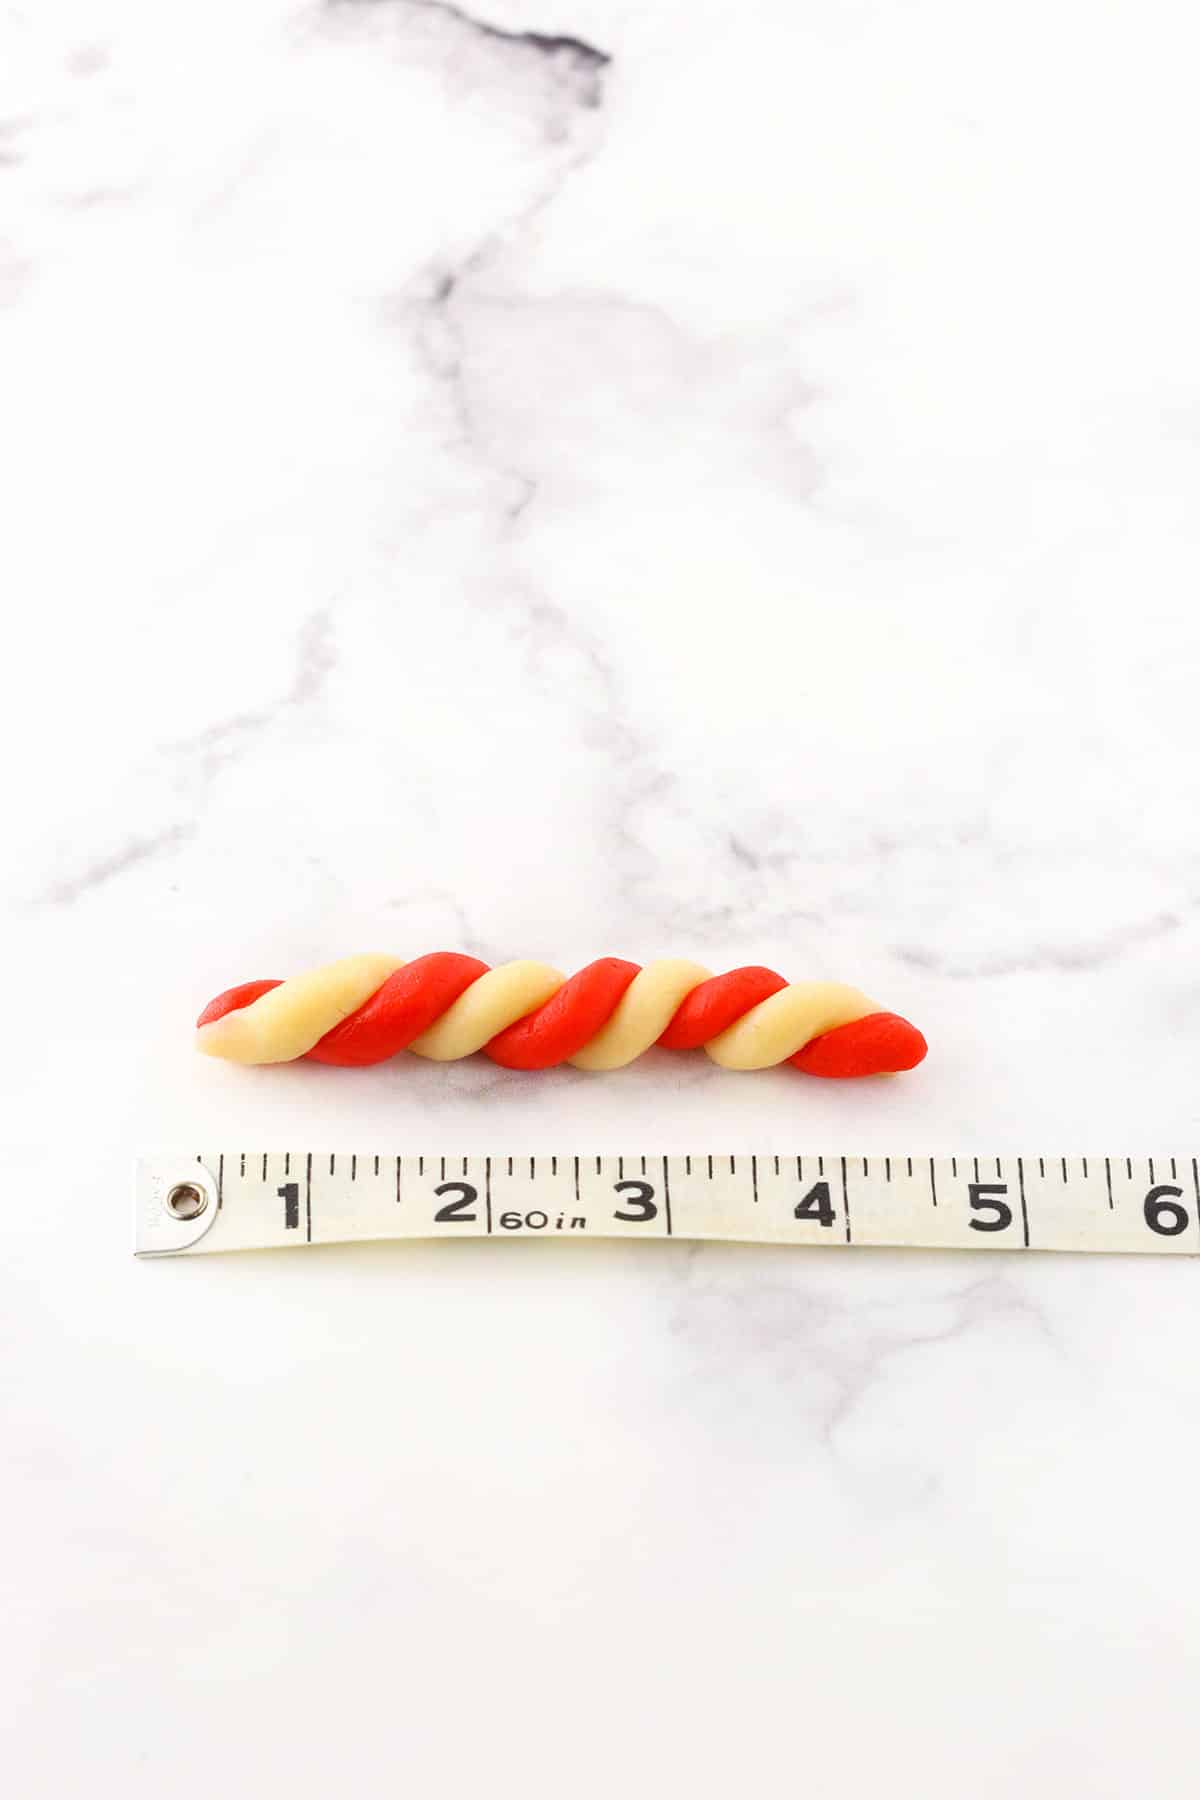 A step in making Red and white Candy Cane Cookies showing the twisting red and white batter to shape the candy cane next to a tape measure showing the scale and size